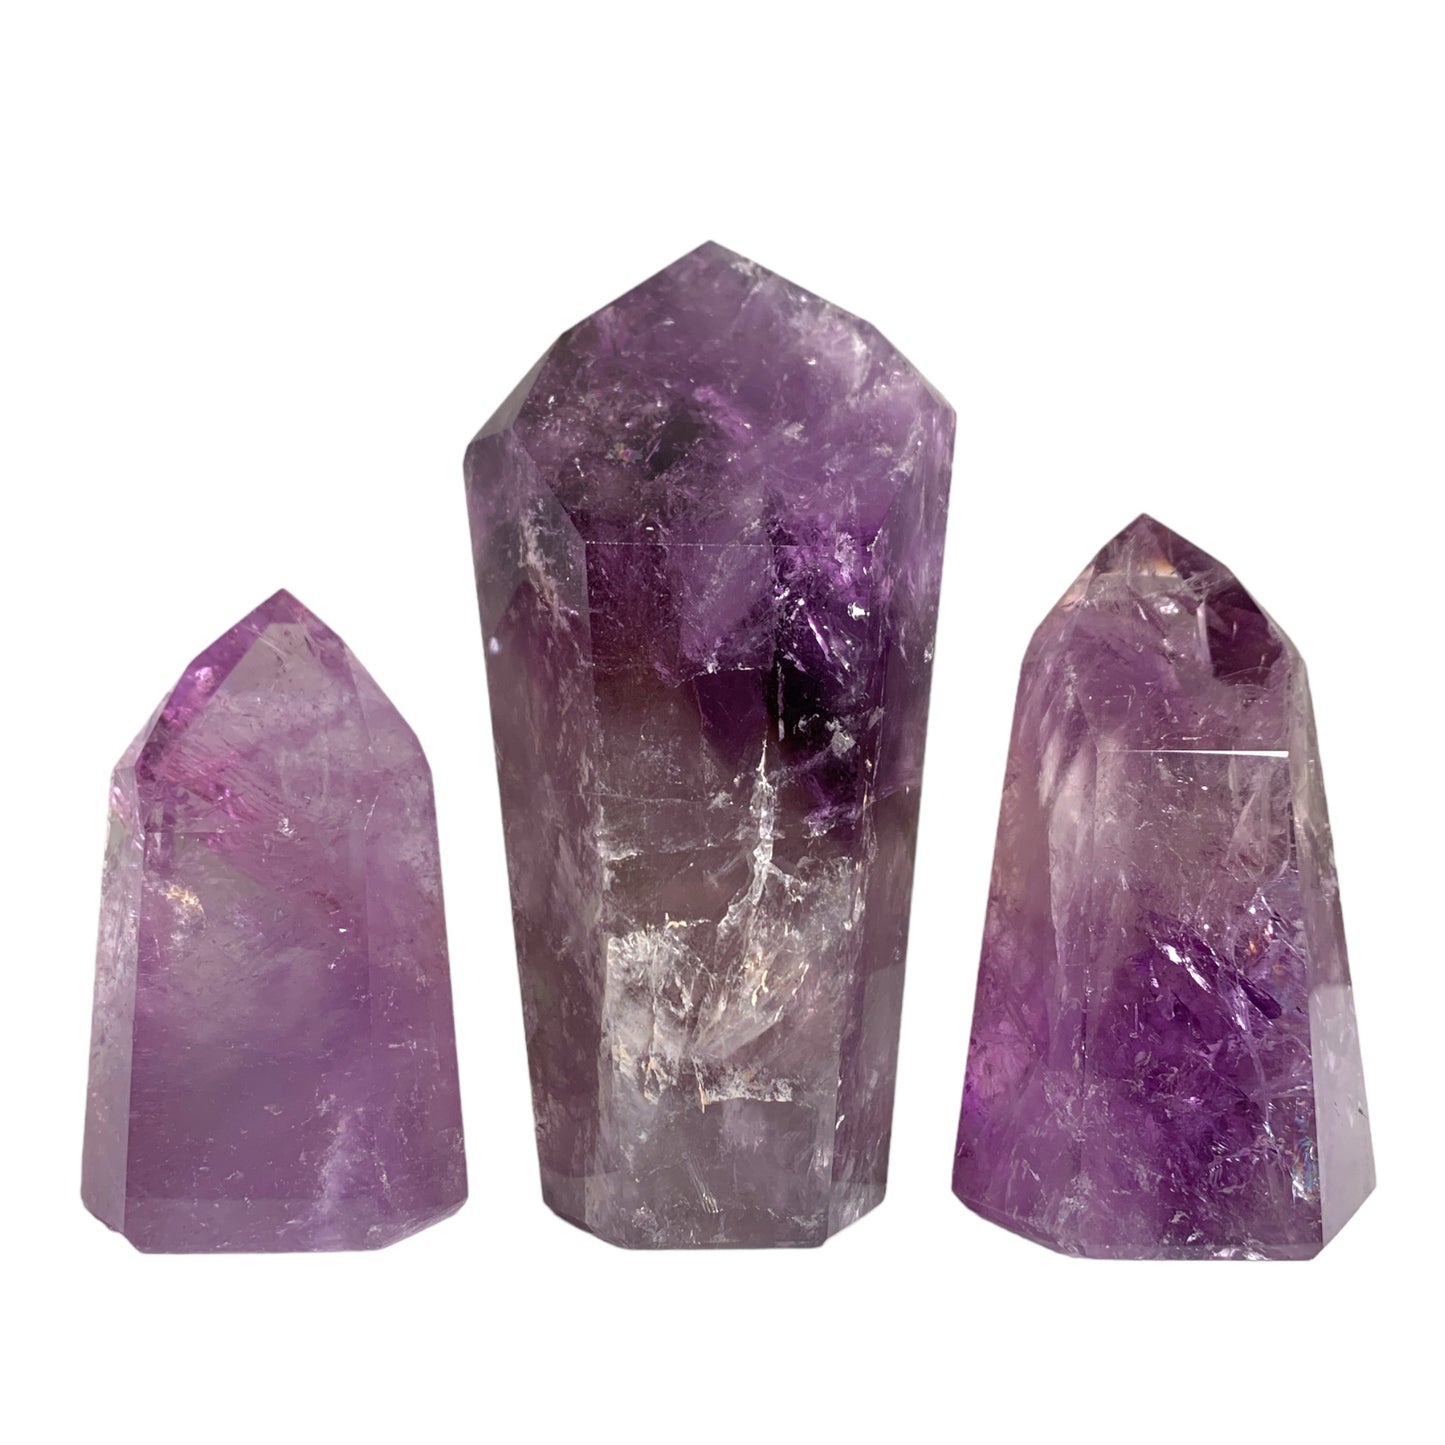 AMETHYST - Polished Points - Grade A - 3 to 6 inch - Price per gram - Brazil - NEW122 (5-10pcs in a kg)